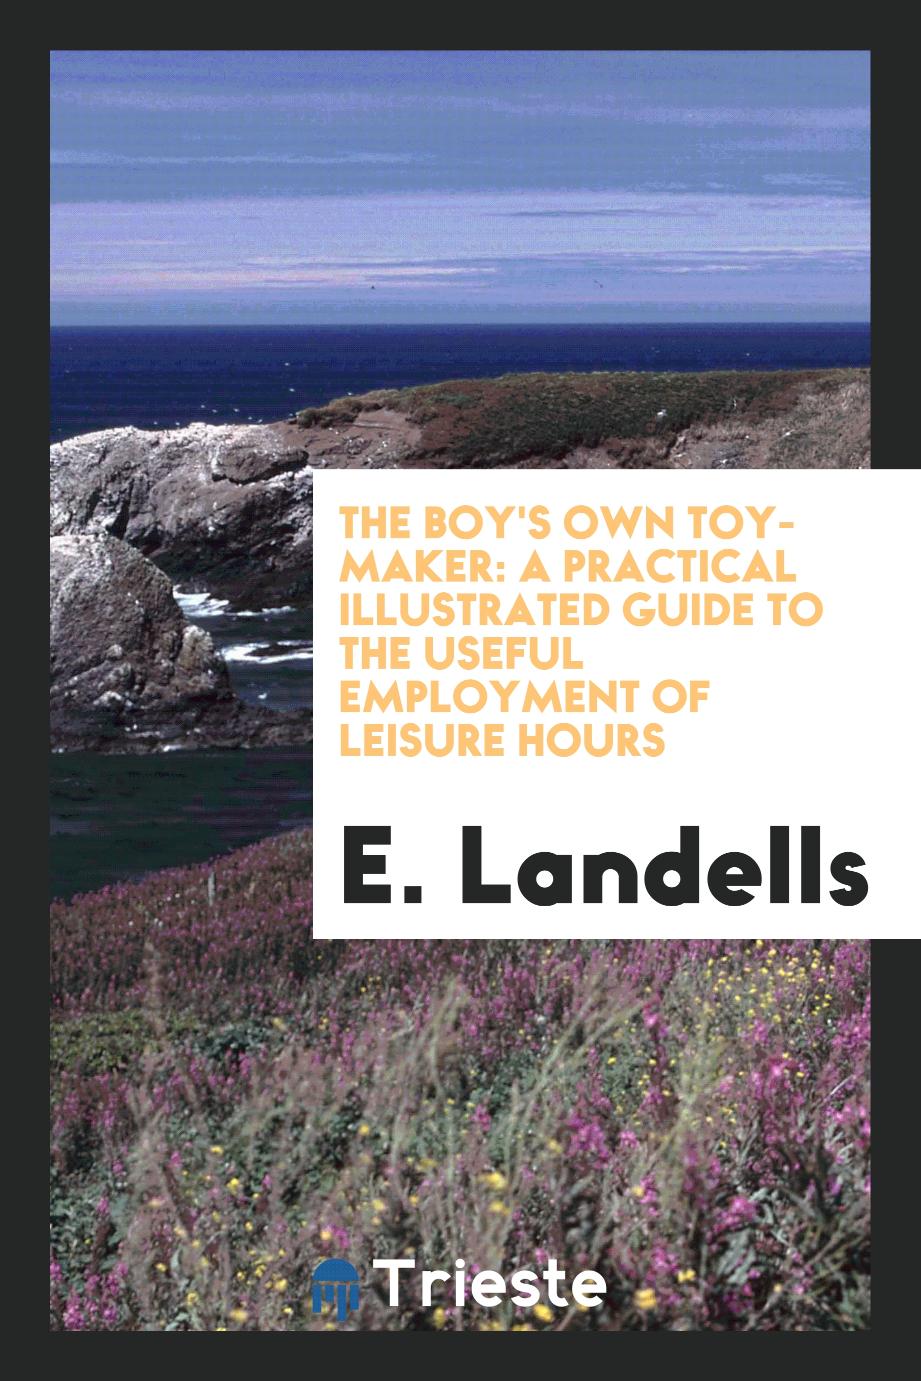 The Boy's Own Toy-Maker: A Practical Illustrated Guide to the Useful Employment of Leisure Hours